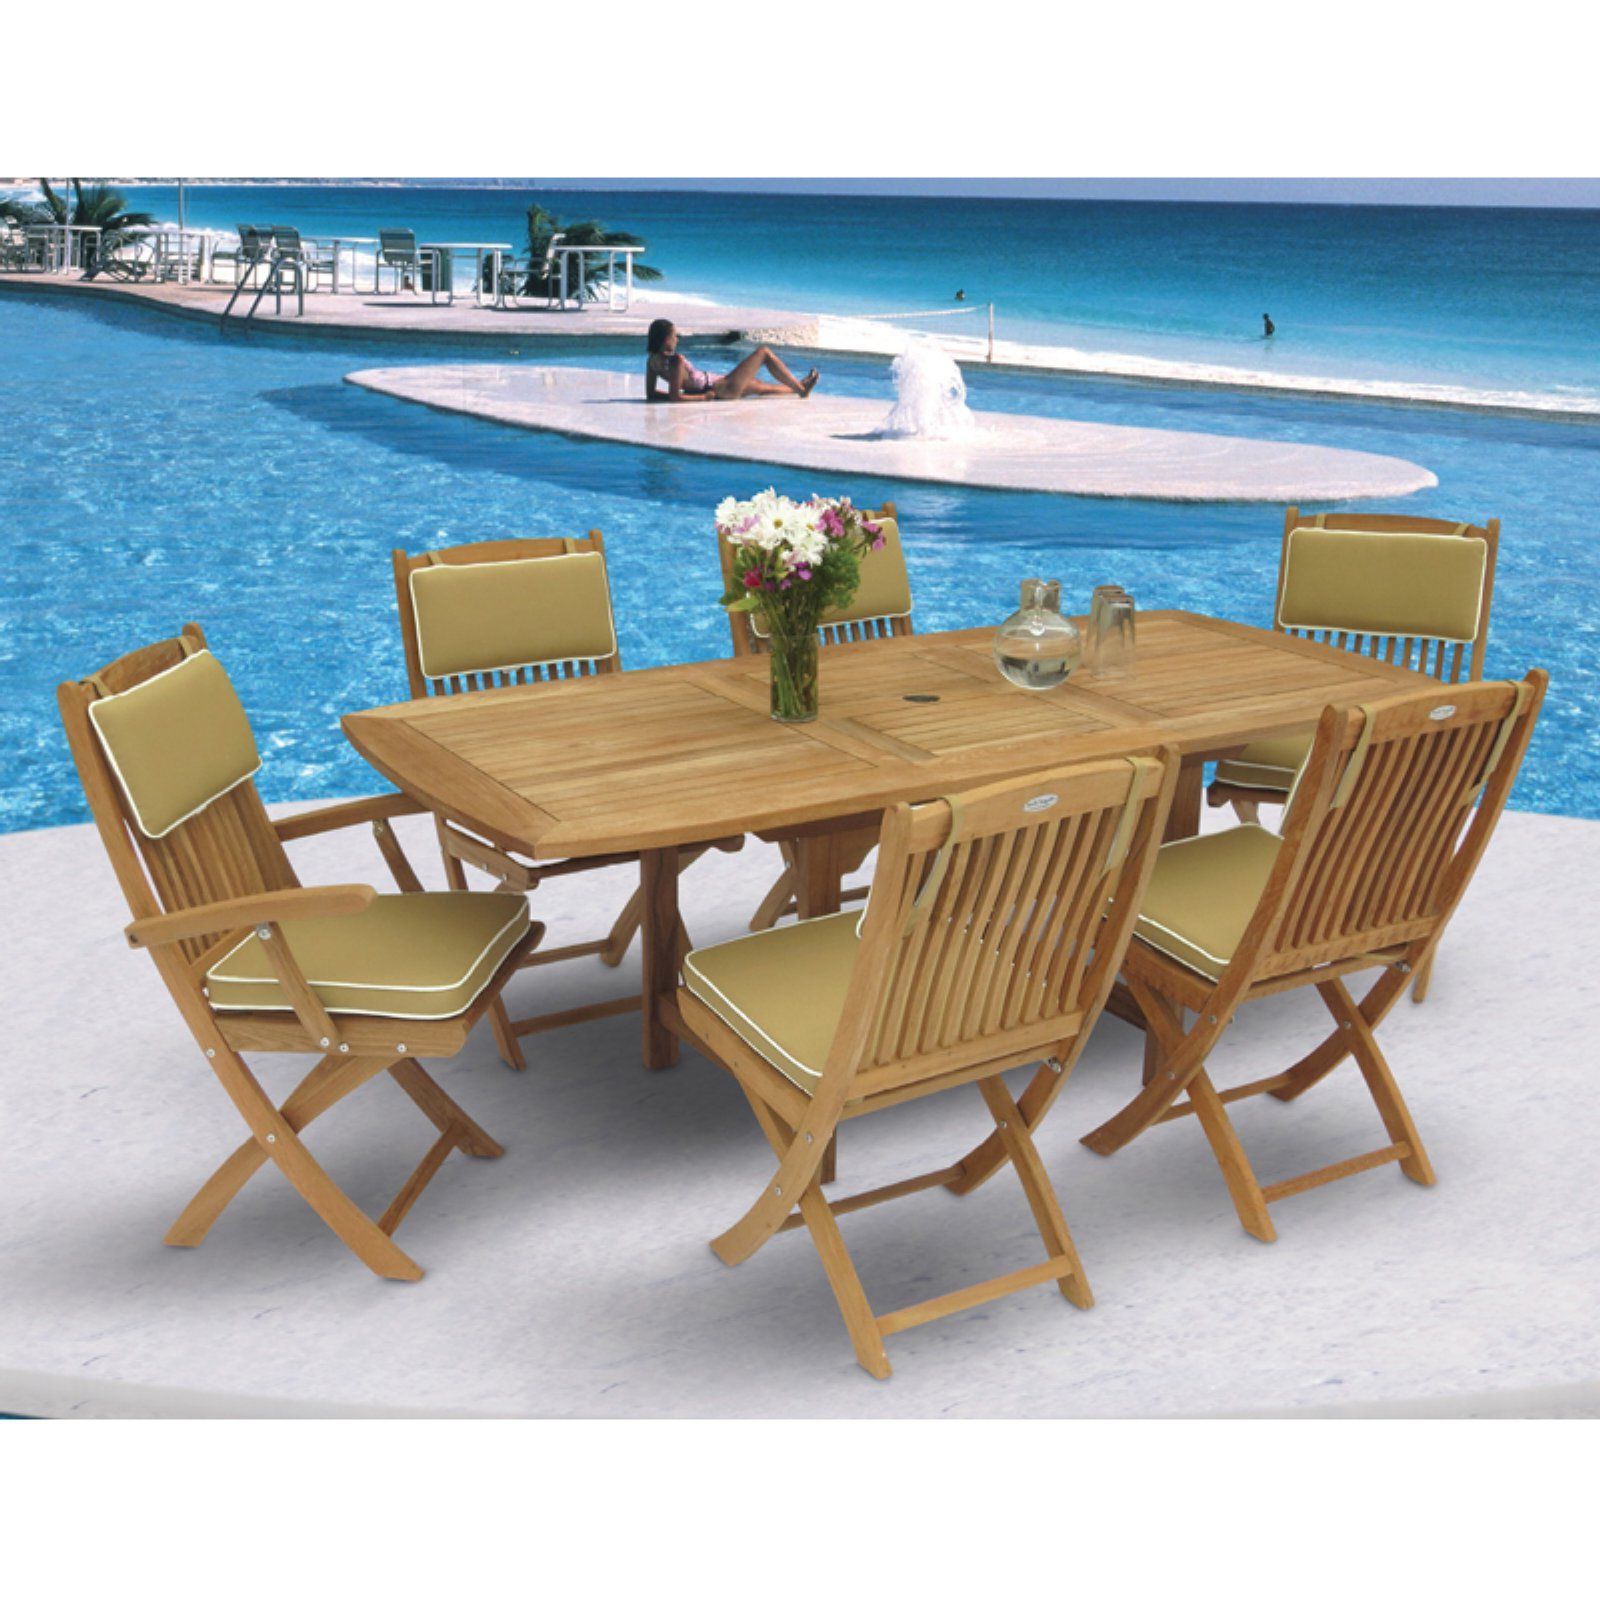 7 Piece Large Patio Dining Sets Inside Most Current Outdoor Royal Teak Wood 7 Piece Rectangular Extension Patio Dining Set (View 8 of 15)